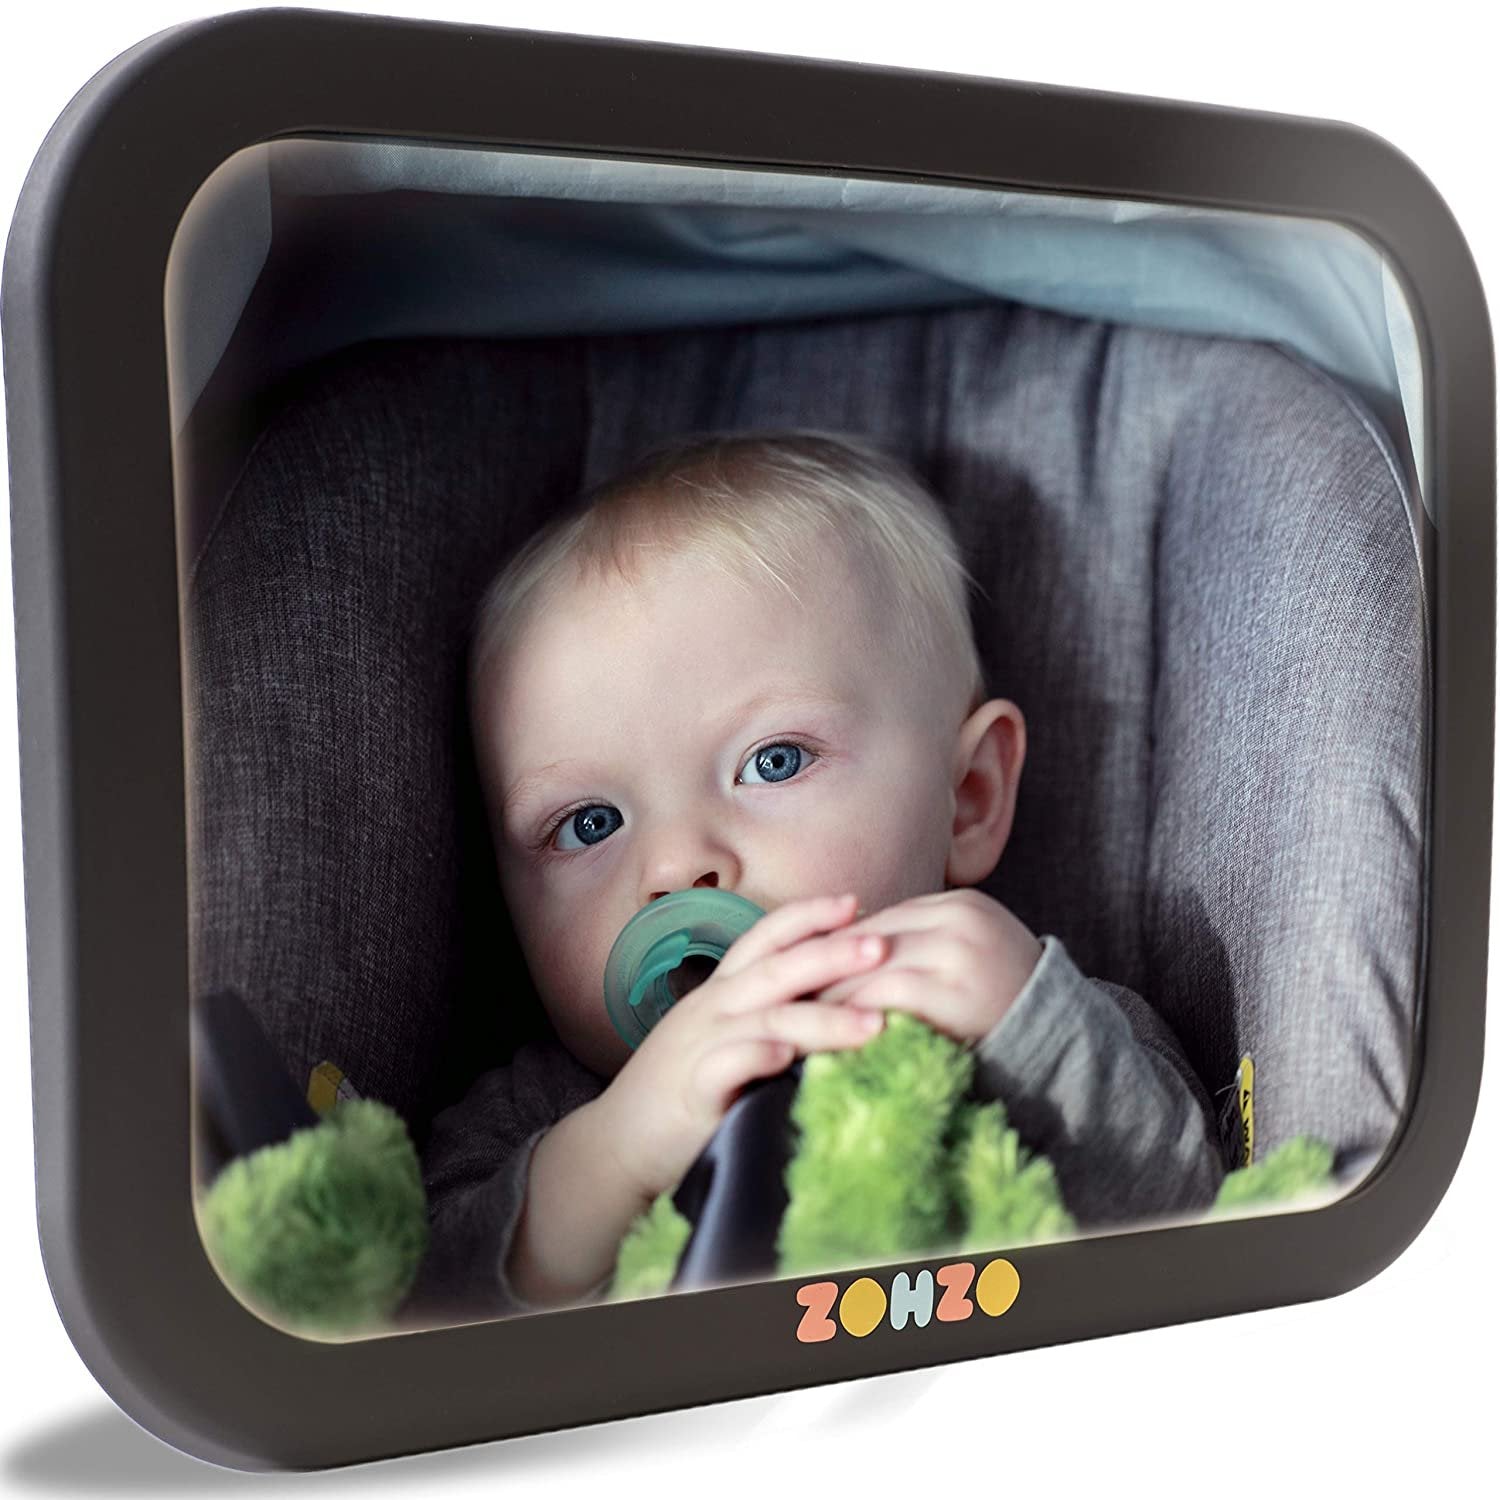 Securely View Infant in Backseat with Baby Car Mirror - Adjustable Pivot Joint, Double Strap - Size: 1 Count - Free Shipping